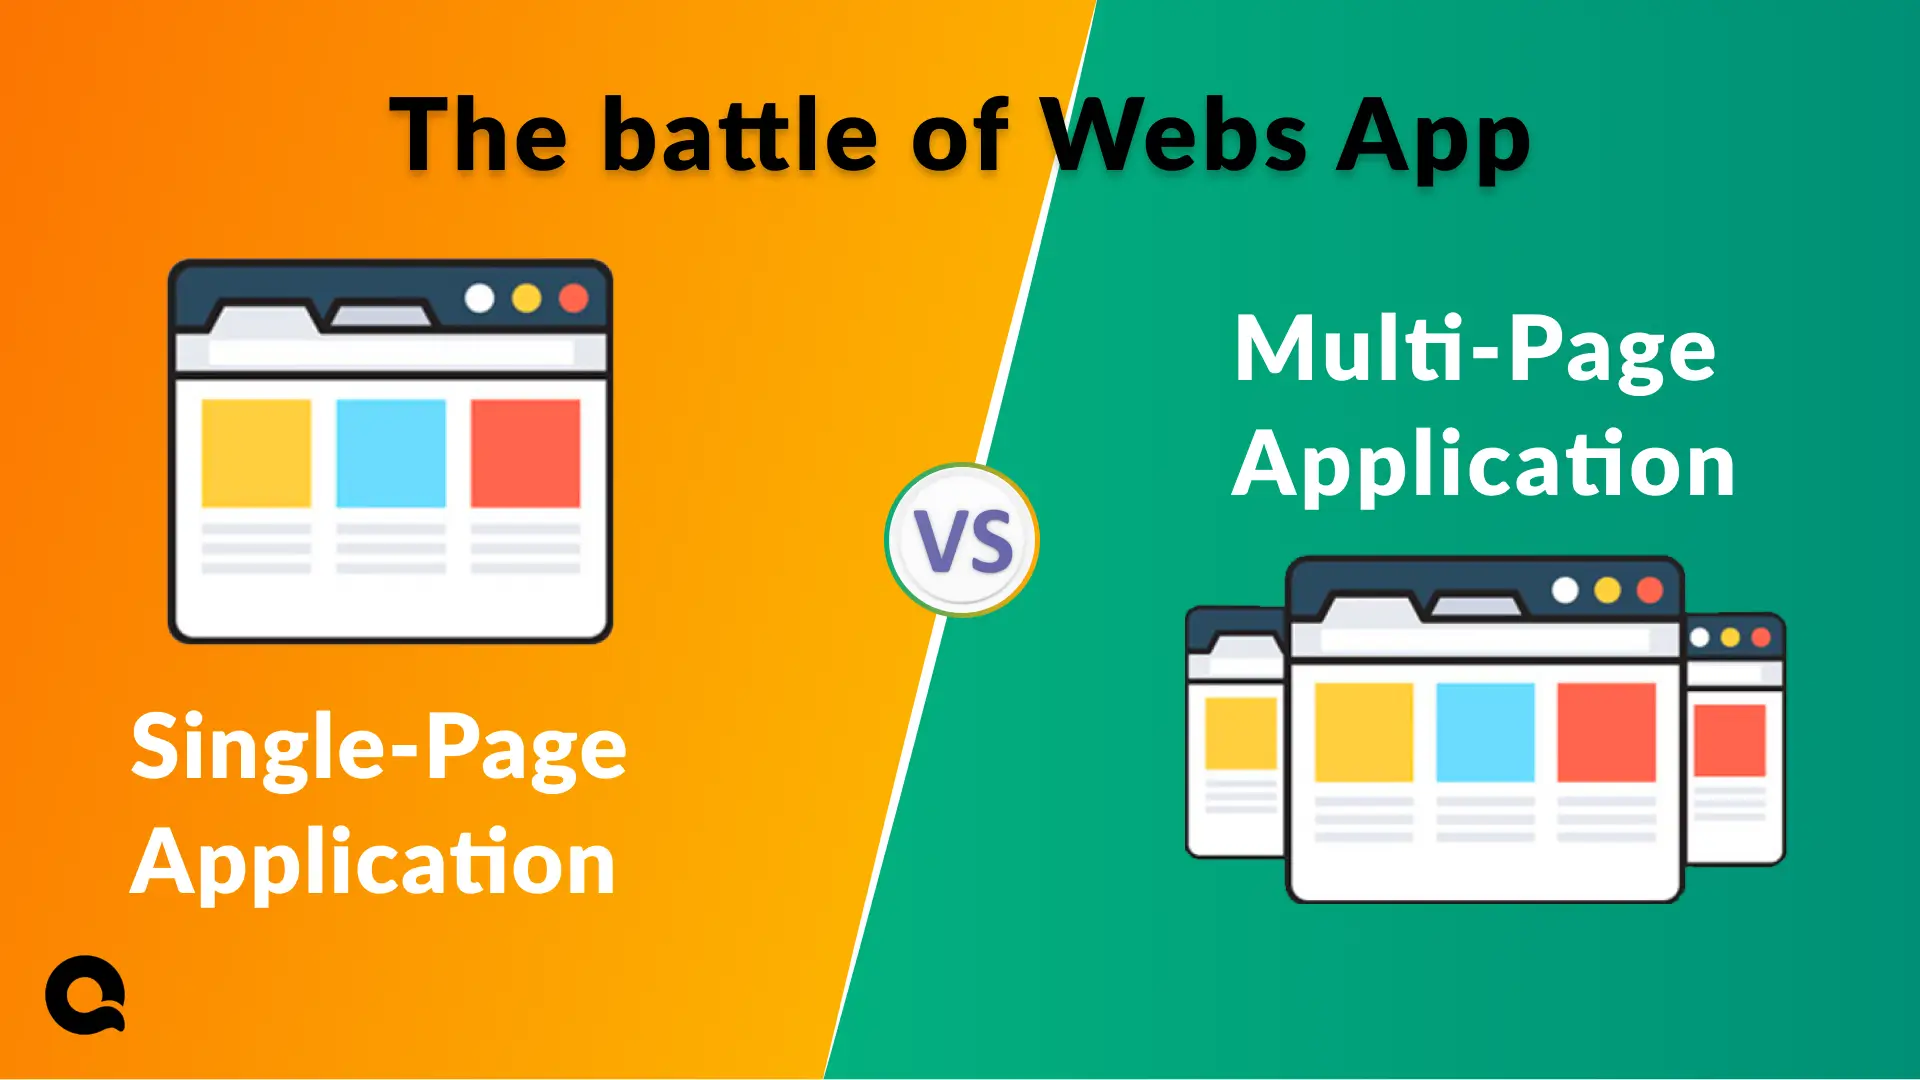 Single-page application Vs multi-page application the battle of Webs App